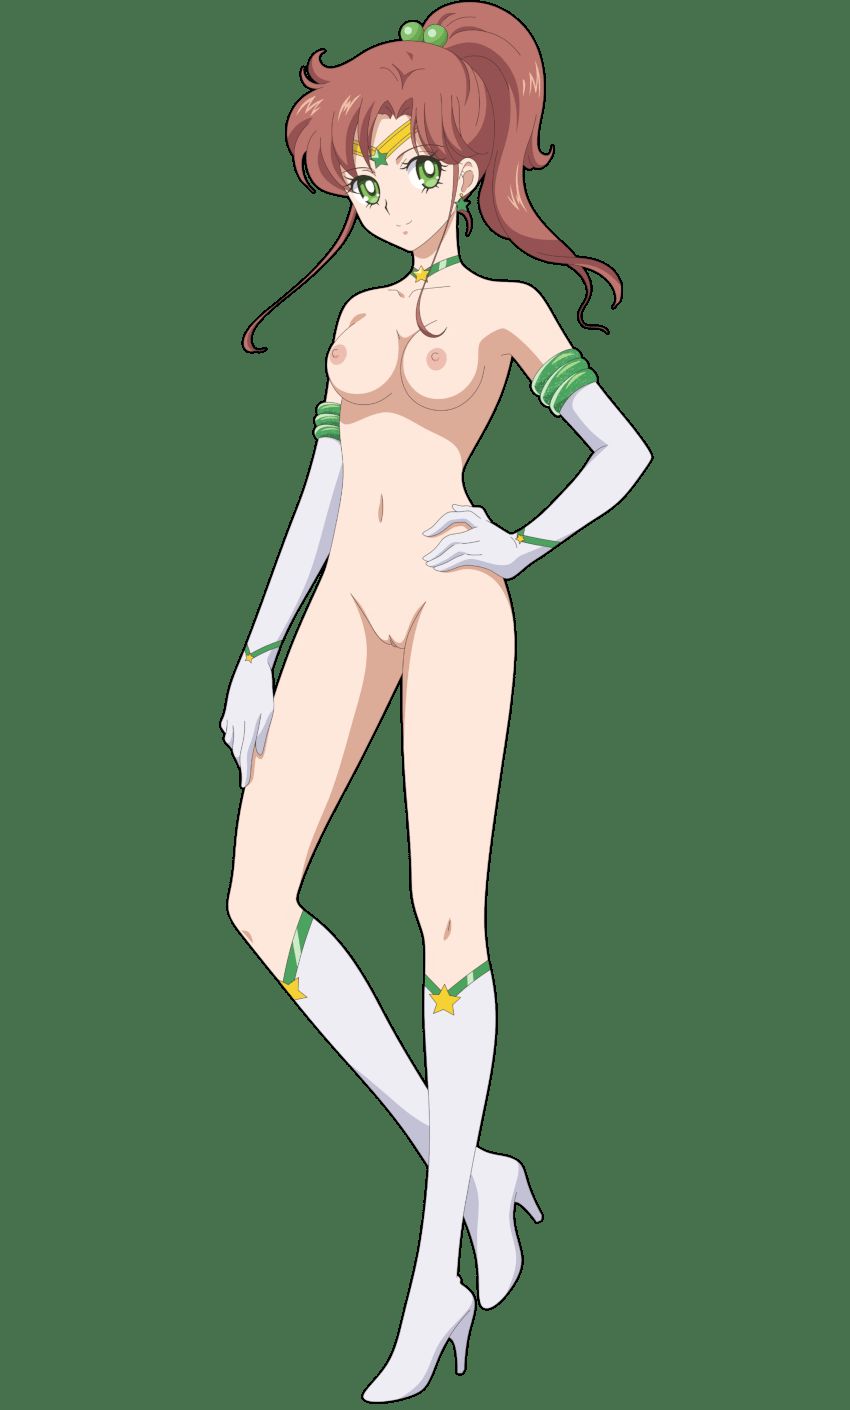 [Erocora character material] PNG background transparent erotic image such as anime character Part 422 38